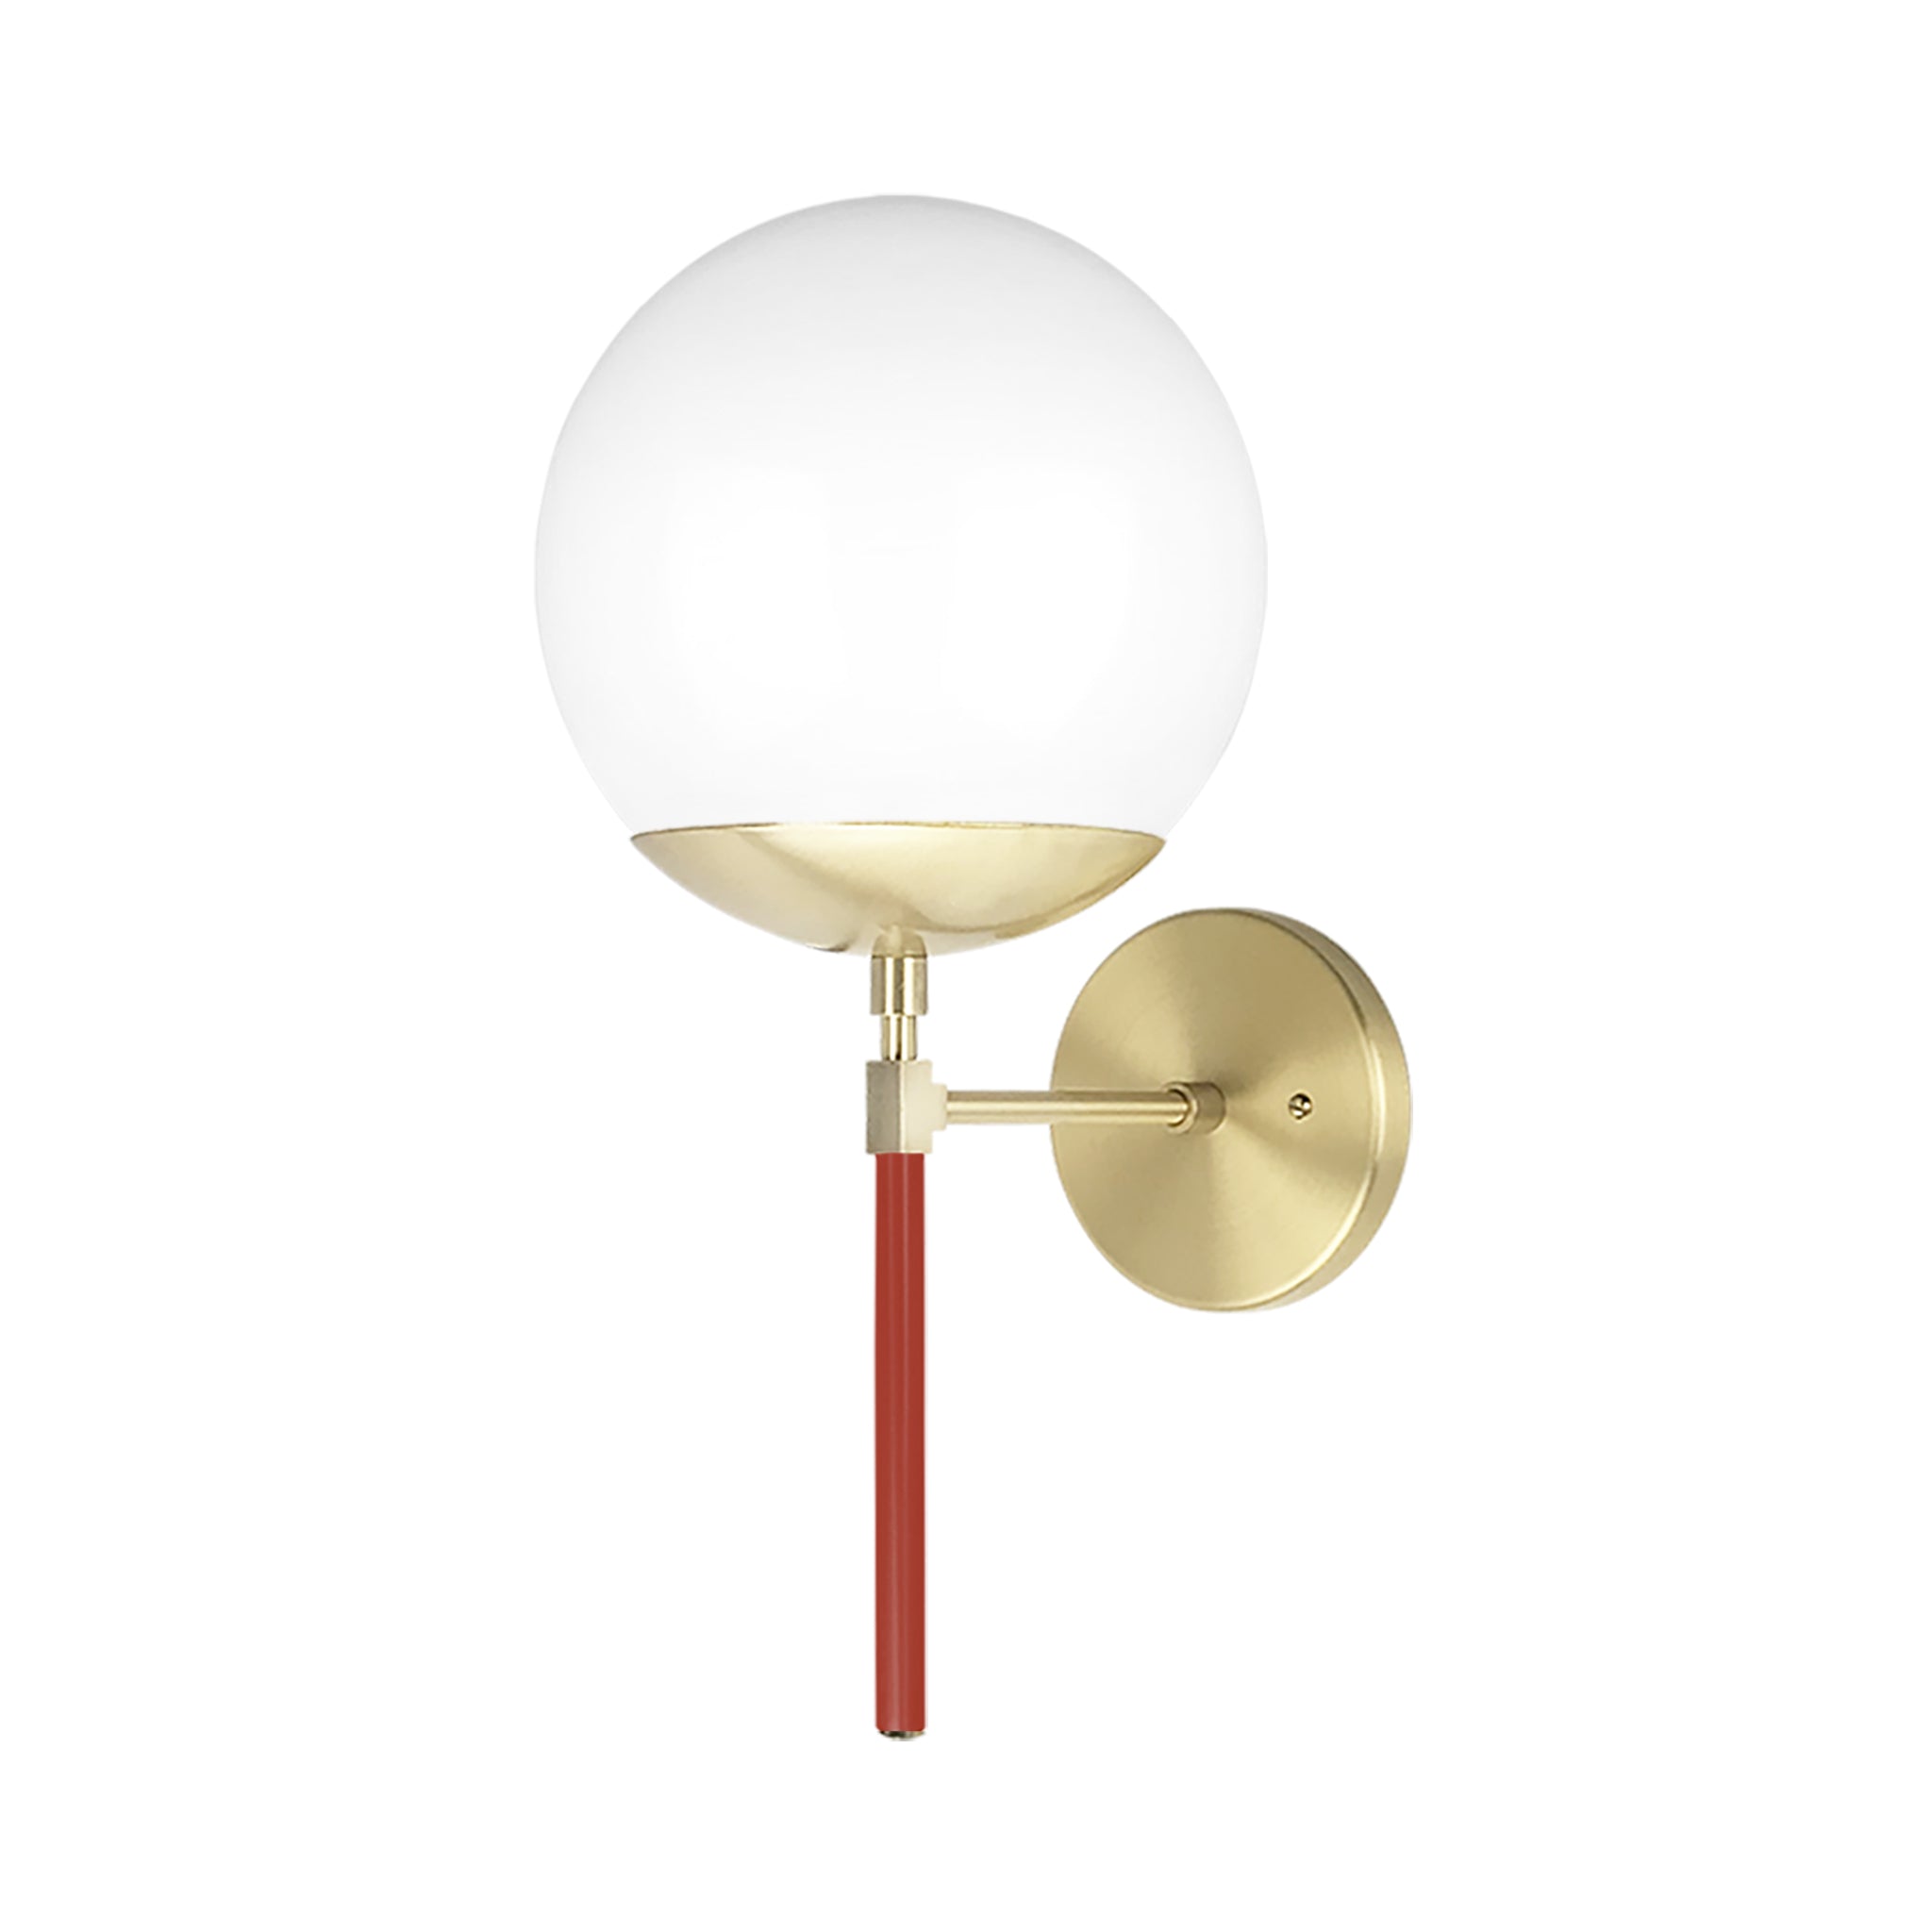 Brass and riding hood red color Lolli sconce 8" Dutton Brown lighting